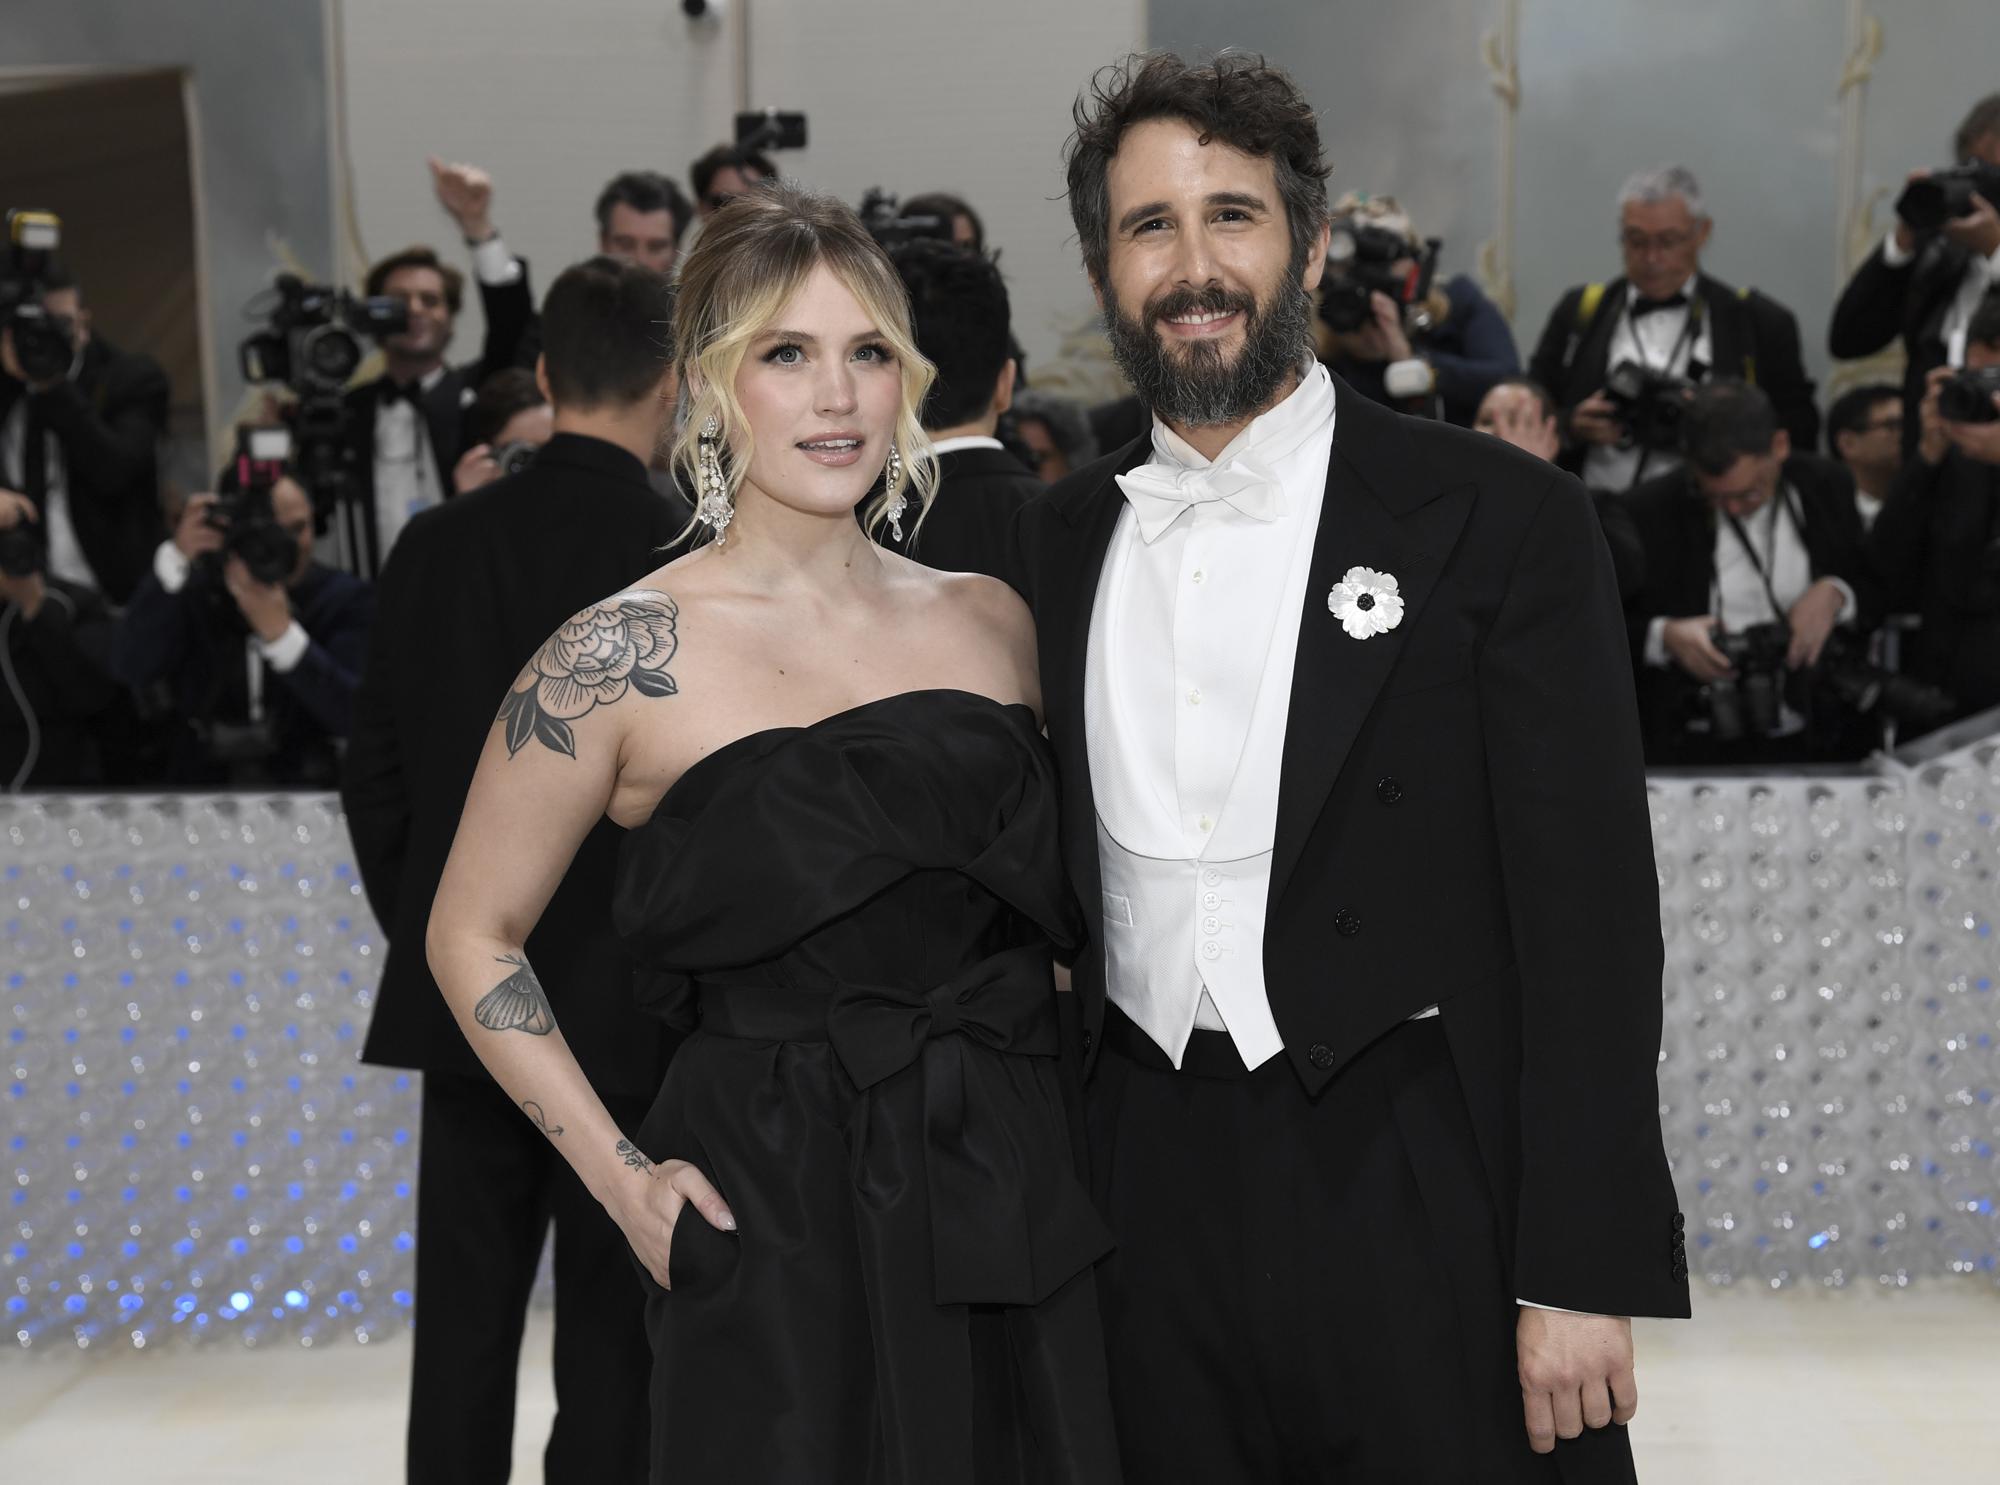 Natalie McQueen, left, and Josh Groban attend The Metropolitan Museum of Art's Costume Institute benefit gala celebrating the opening of the "Karl Lagerfeld: A Line of Beauty" exhibition on Monday, May 1, 2023, in New York. (Photo by Evan Agostini/Invision/AP)